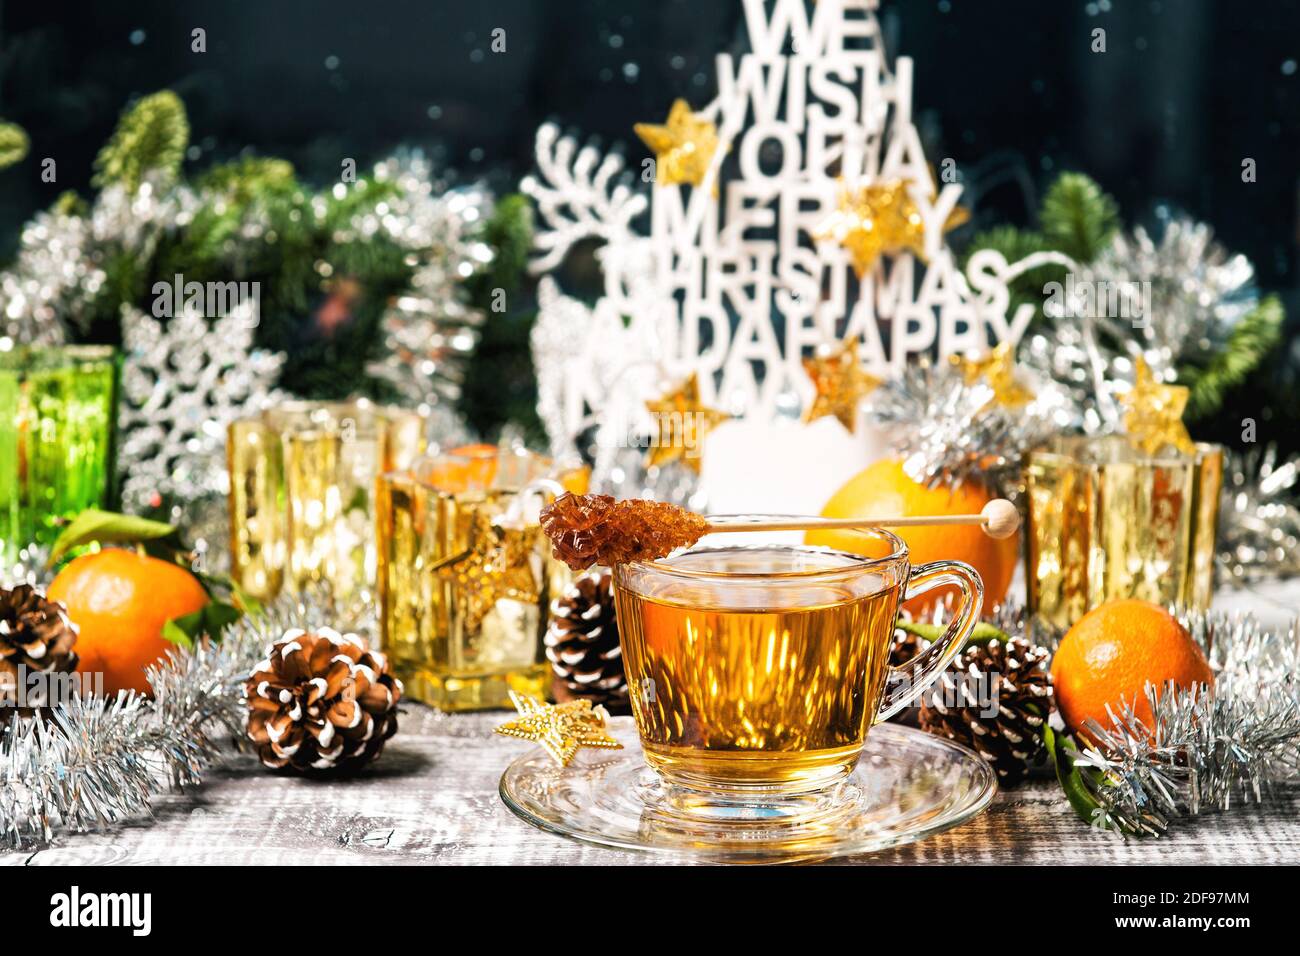 Winter hot drink. Cup of tea with window decoration. Christmas ornaments Stock Photo